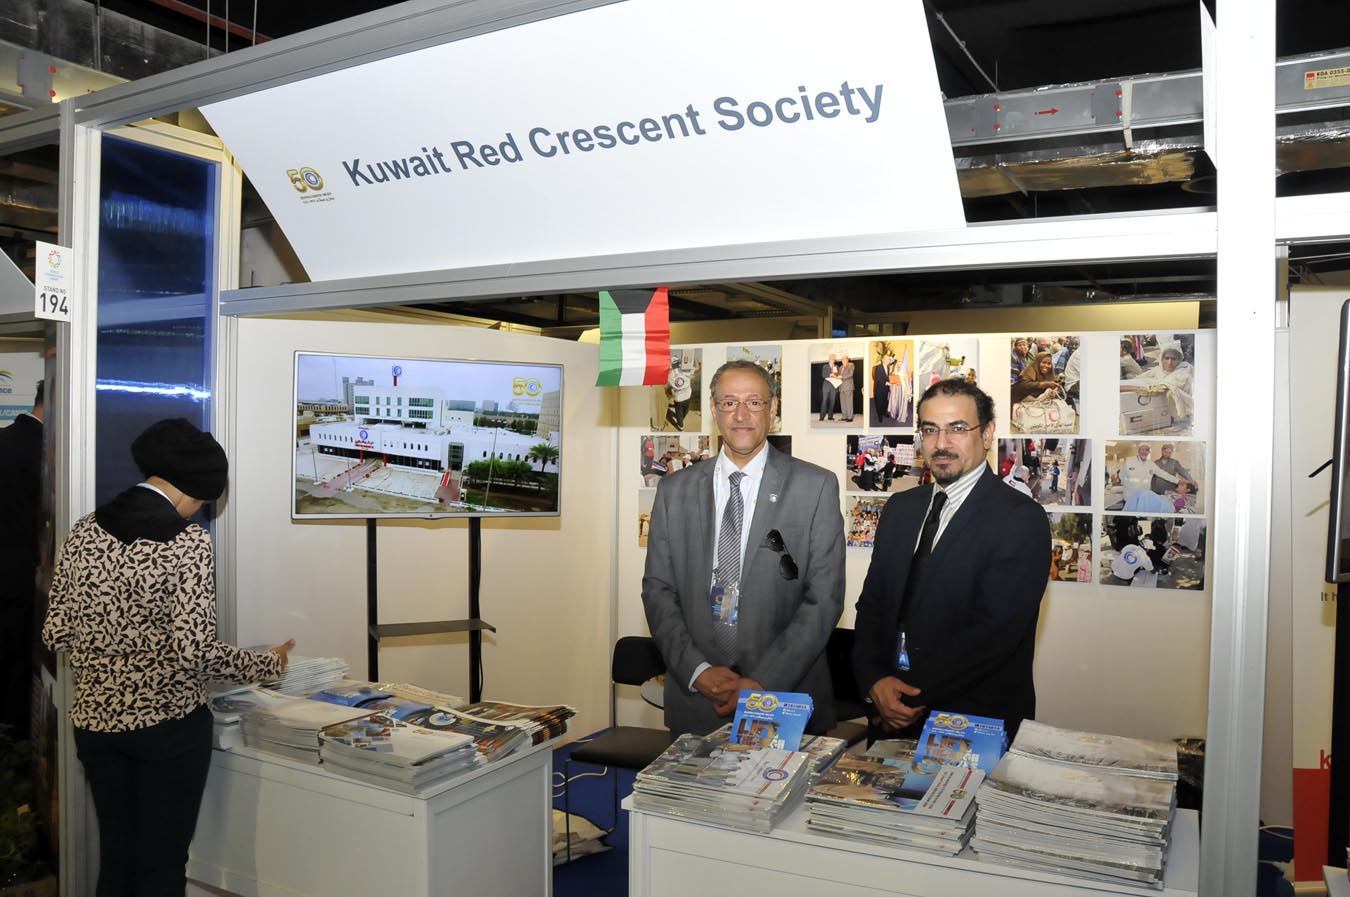 Deputy Chairman of the Kuwait Red Crescent Society (KRCS) Anwar Al-Hasawi visits the exhibition held on the sidelines of the World Humanitarian summit